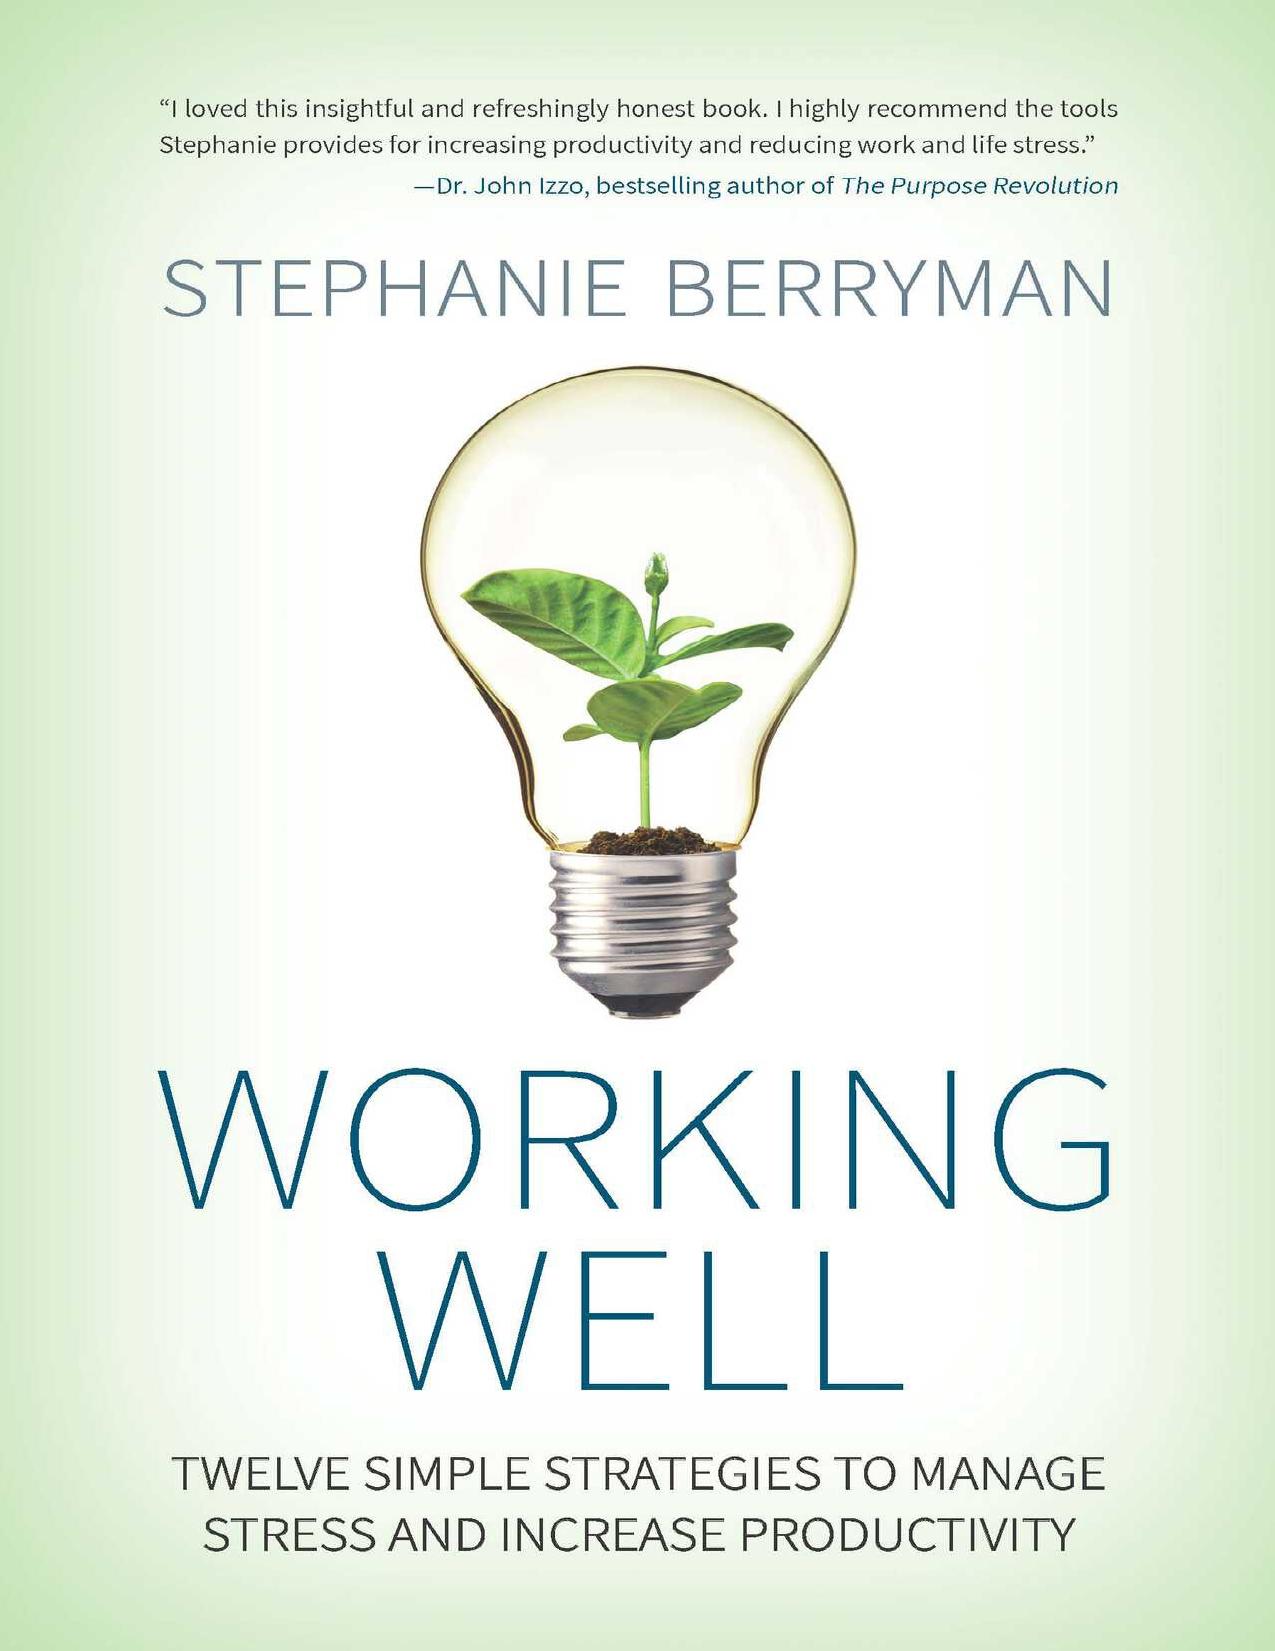 Working Well: Twelve Simple Strategies to Manage Stress and Increase Productivity by Stephanie Berryman